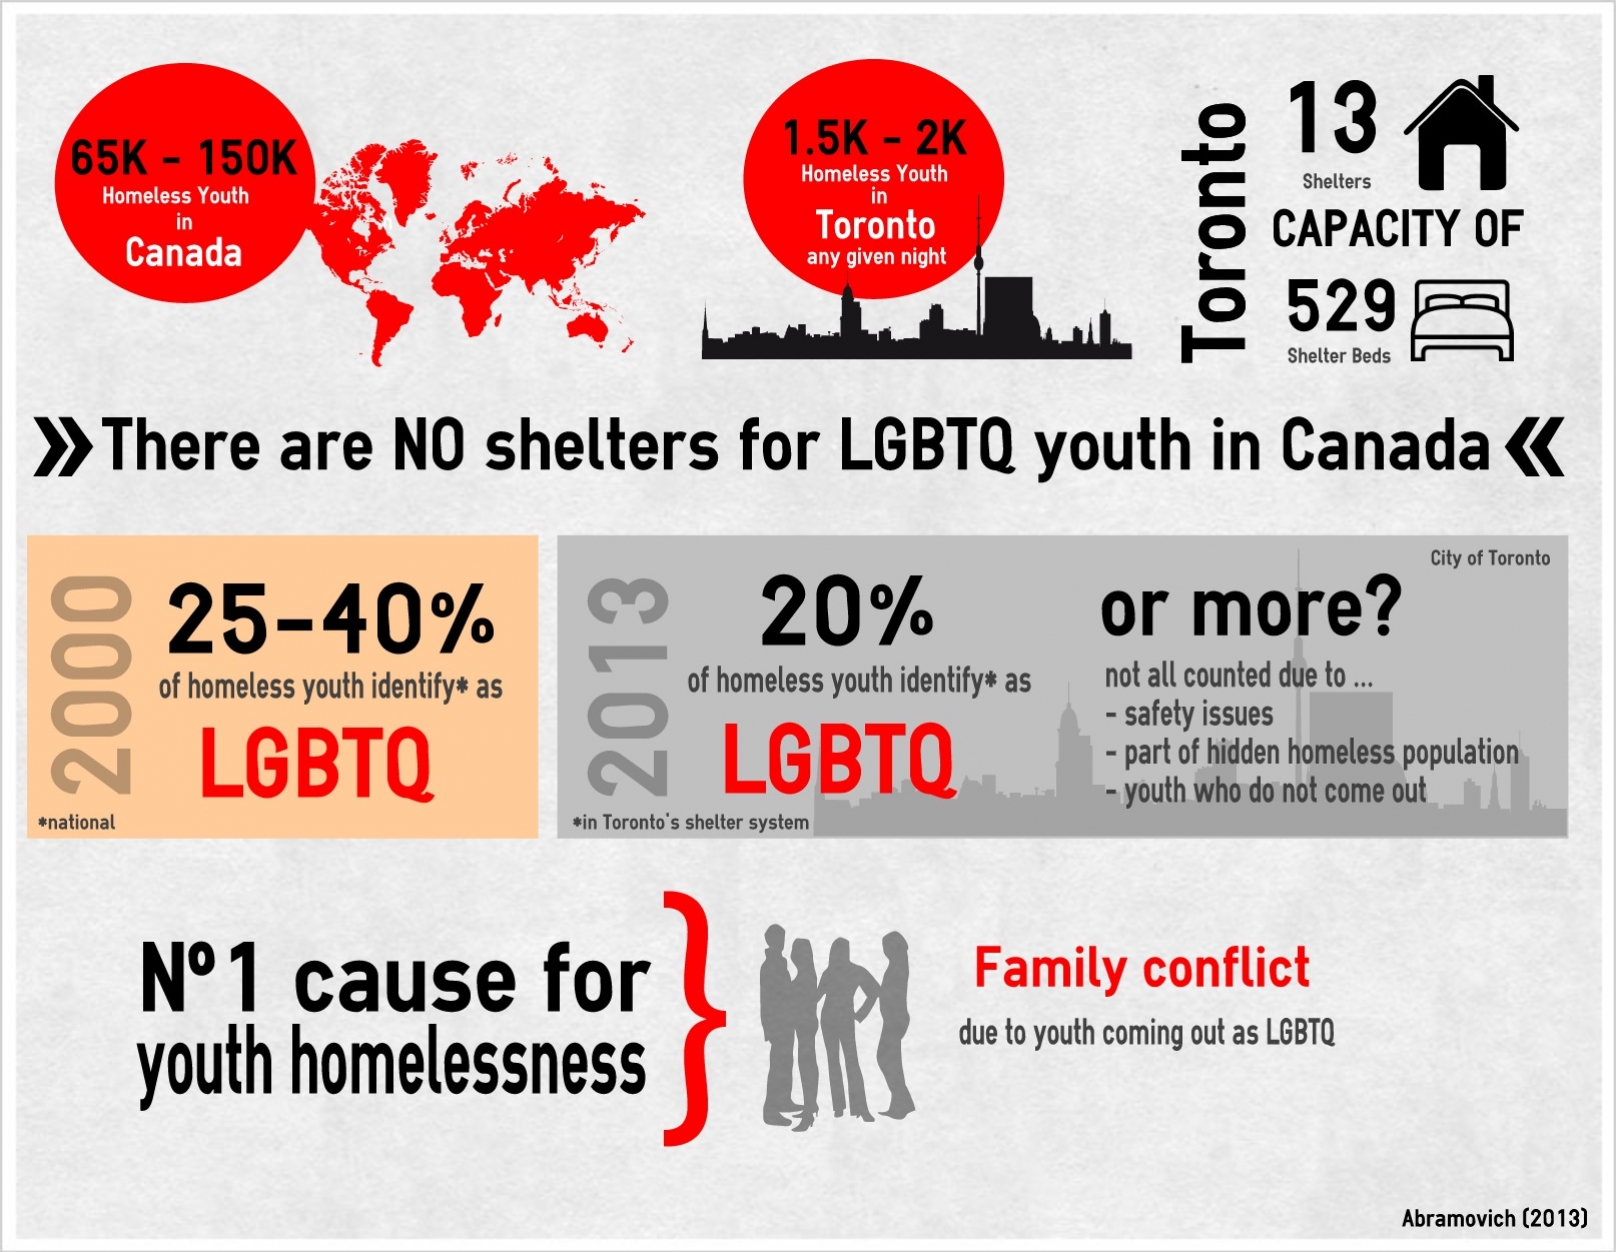 There is No shelters for LGBTQ youth in Canada